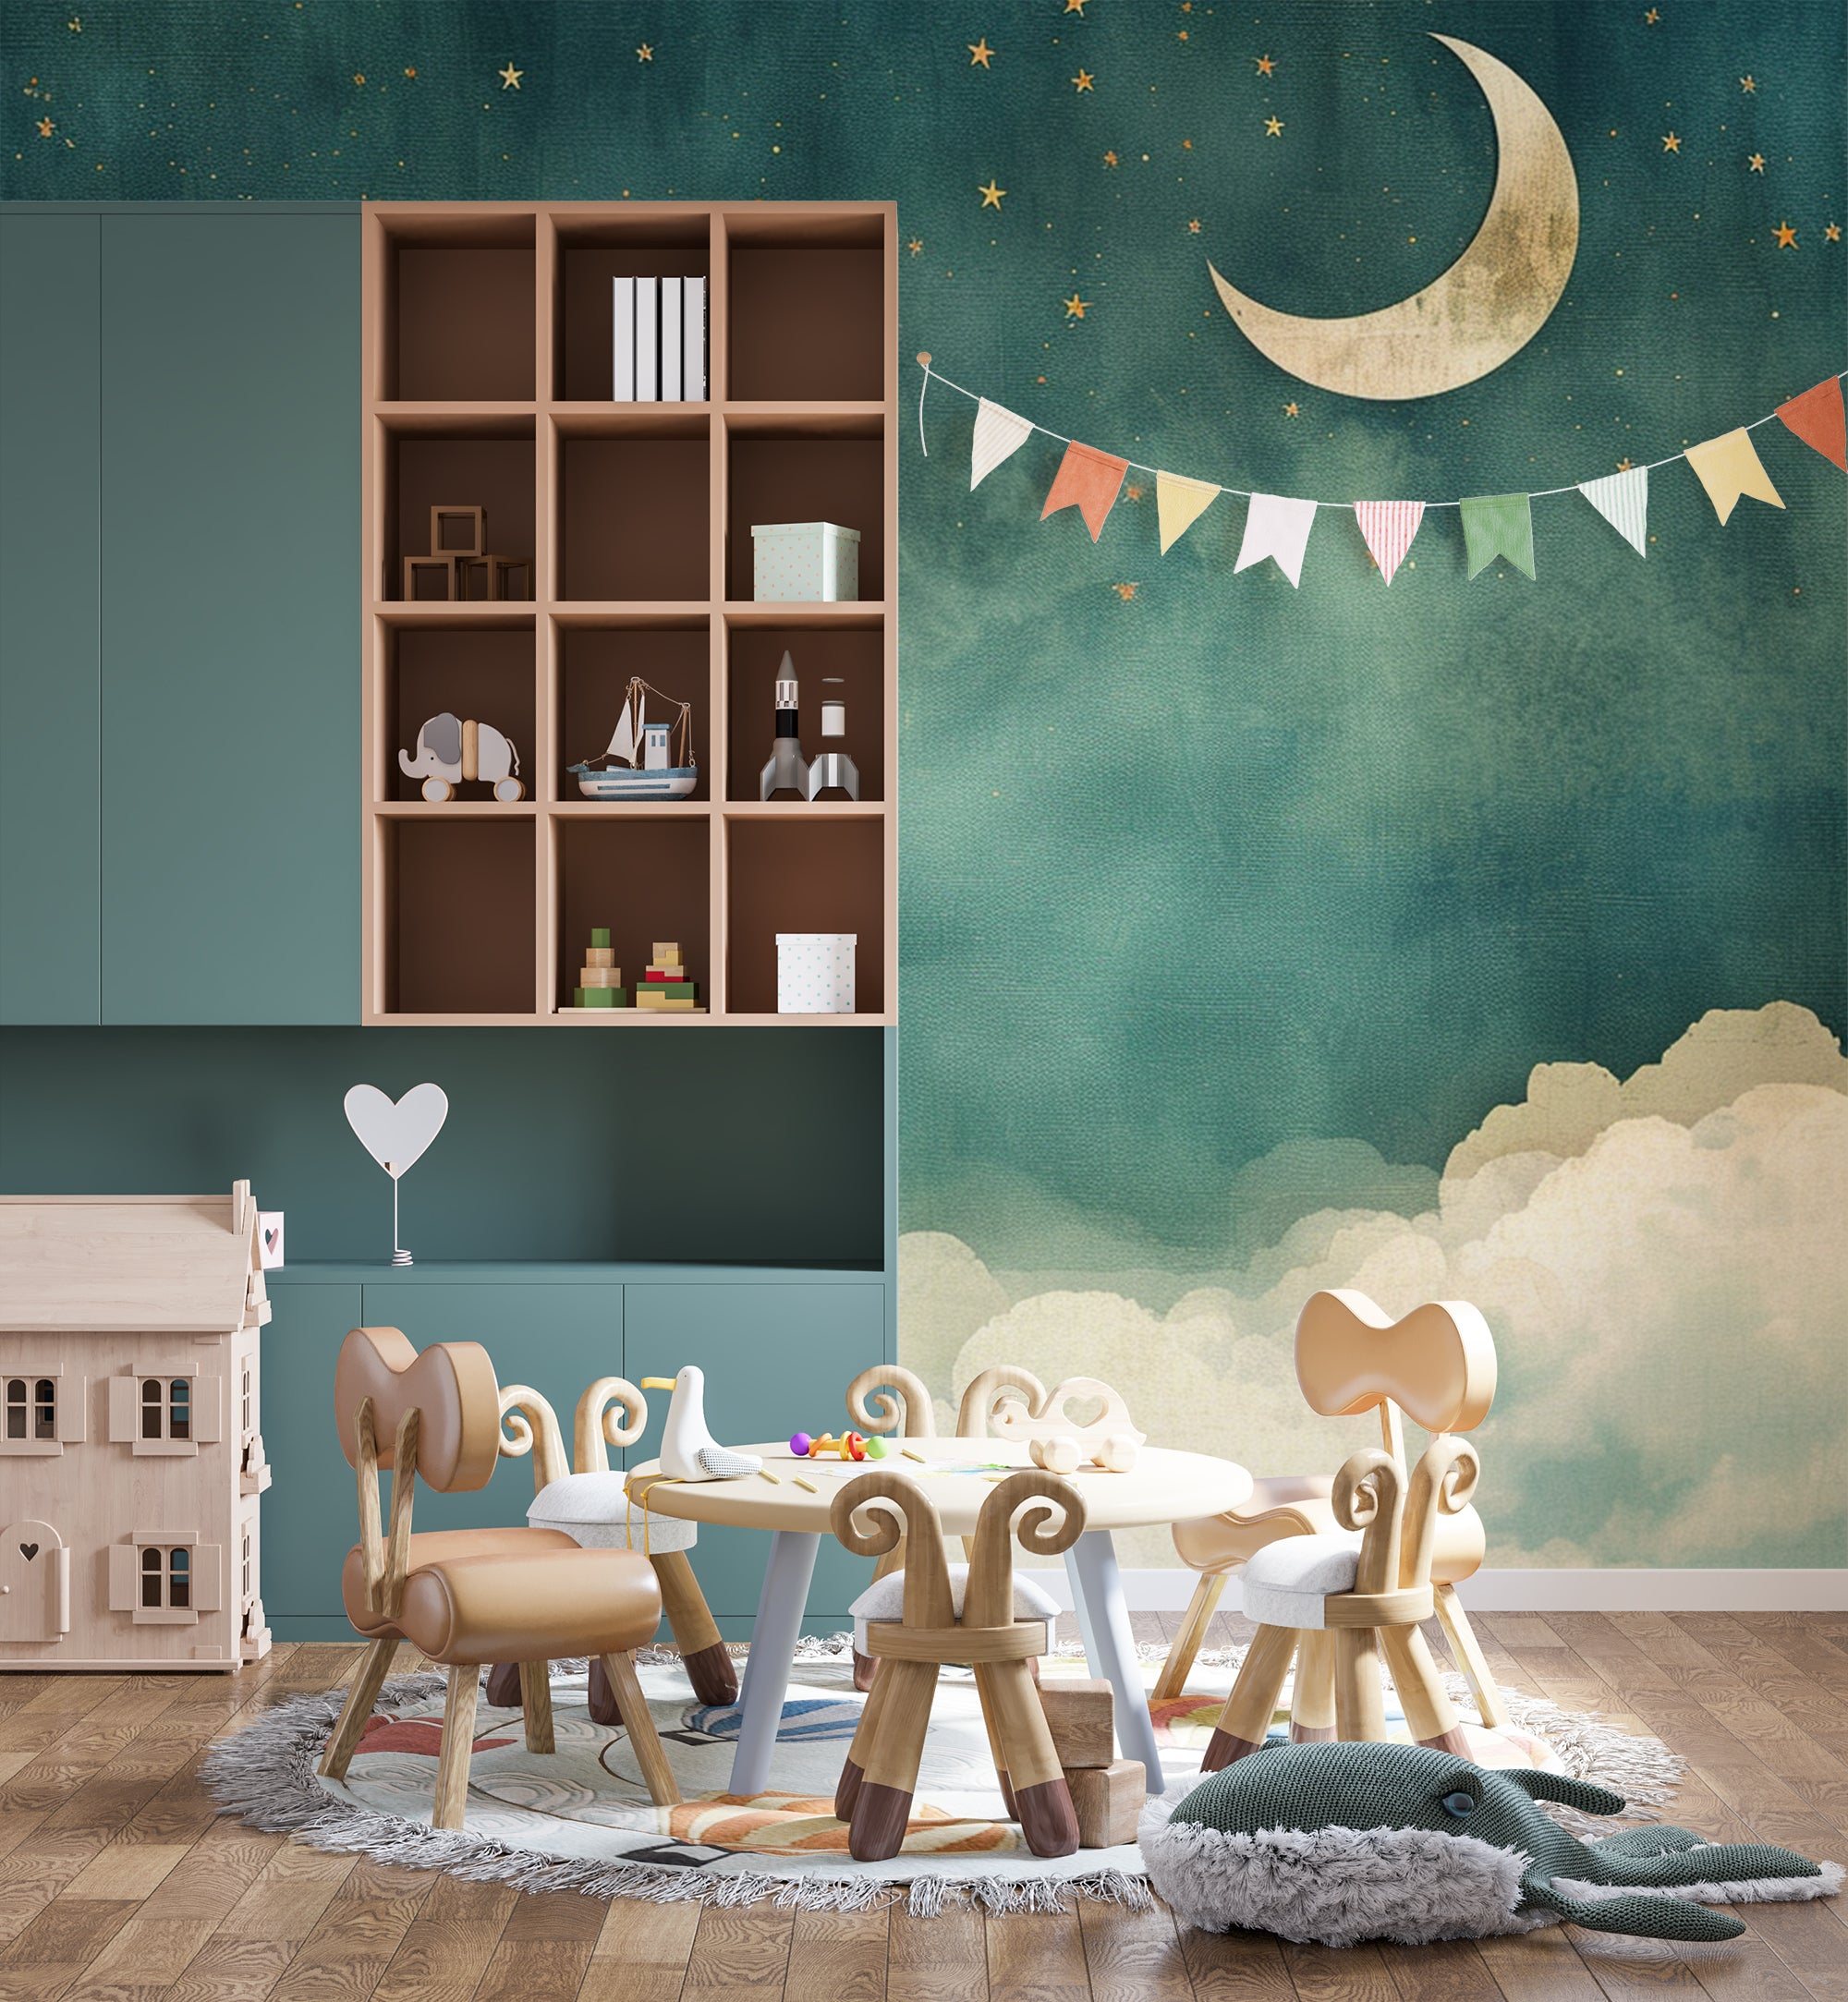 Starry Lullaby: Sweet Dreams on Wallpaper